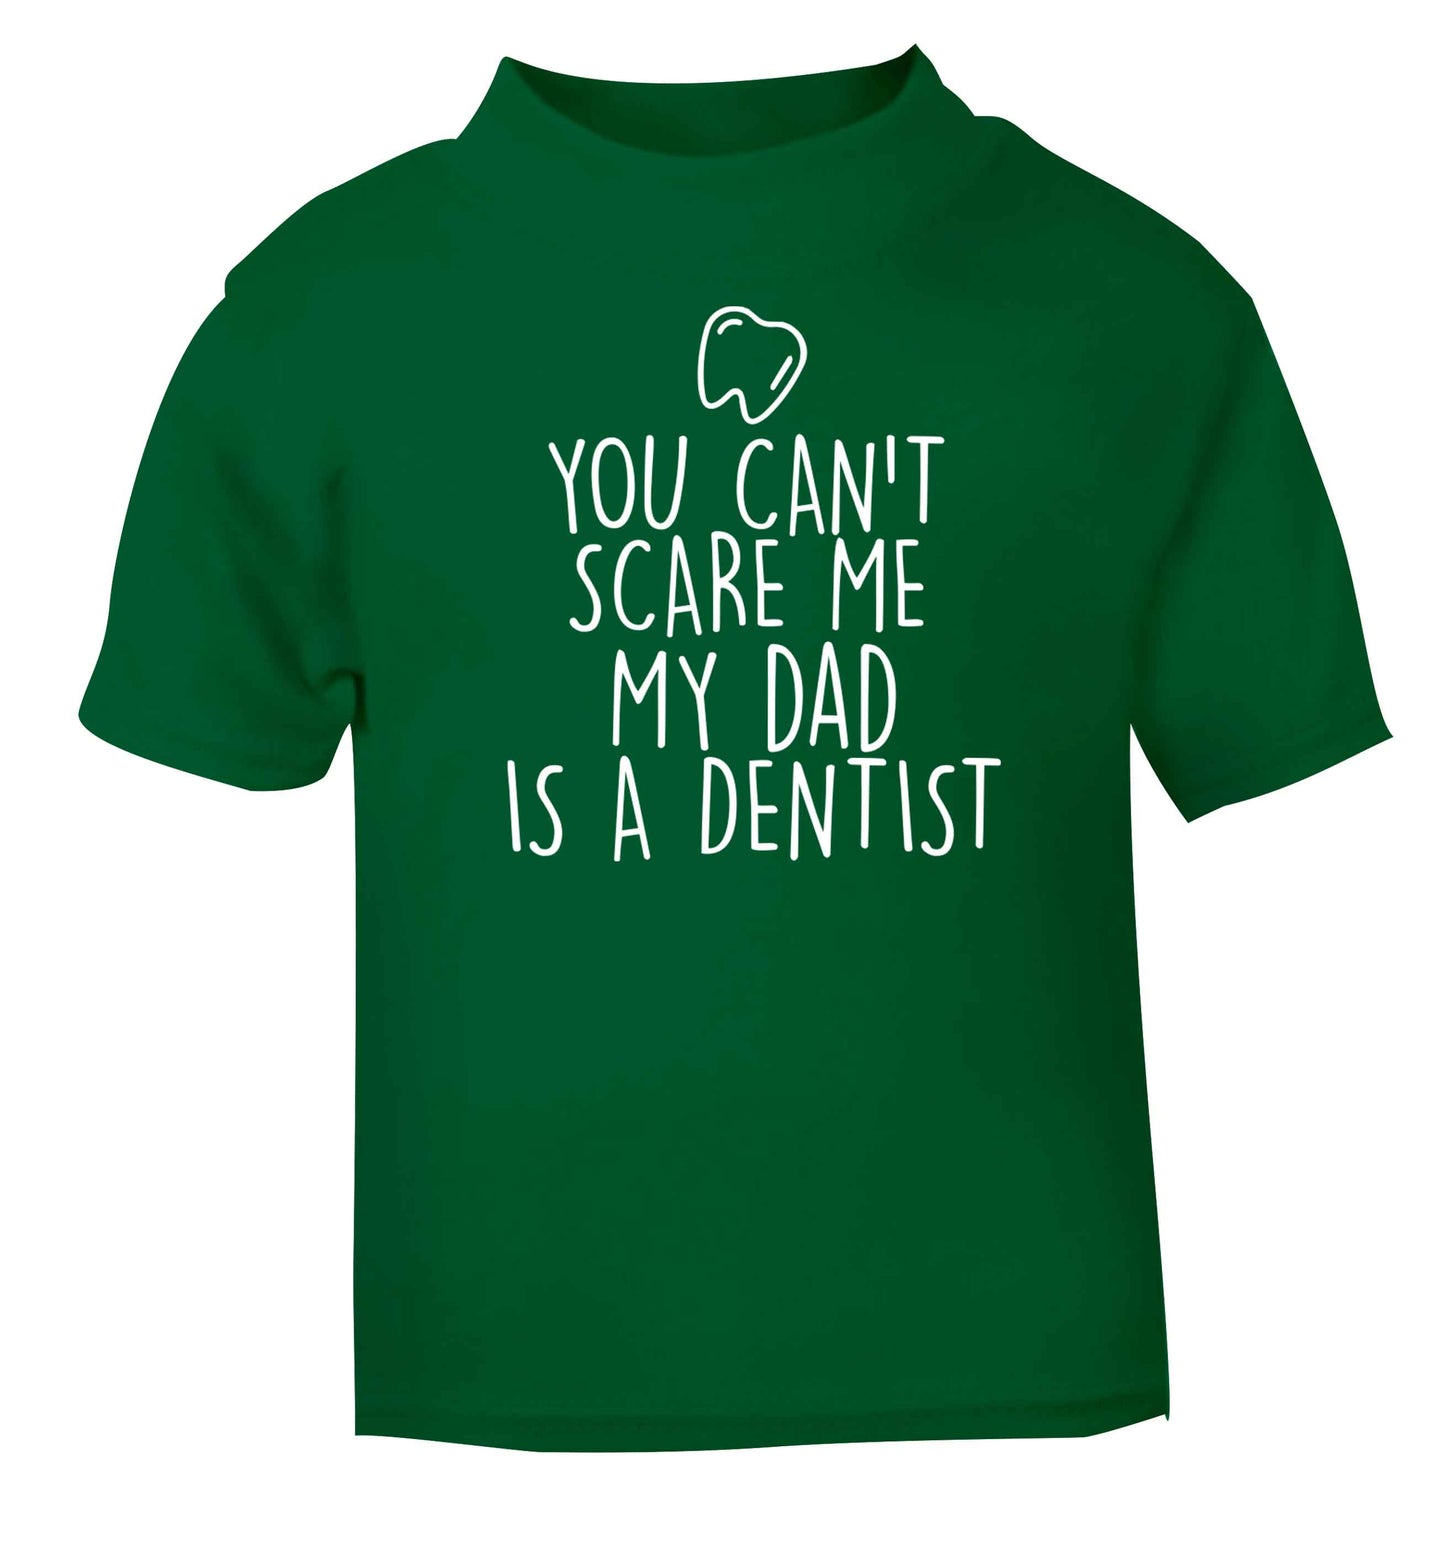 You can't scare me my dad is a dentist green baby toddler Tshirt 2 Years